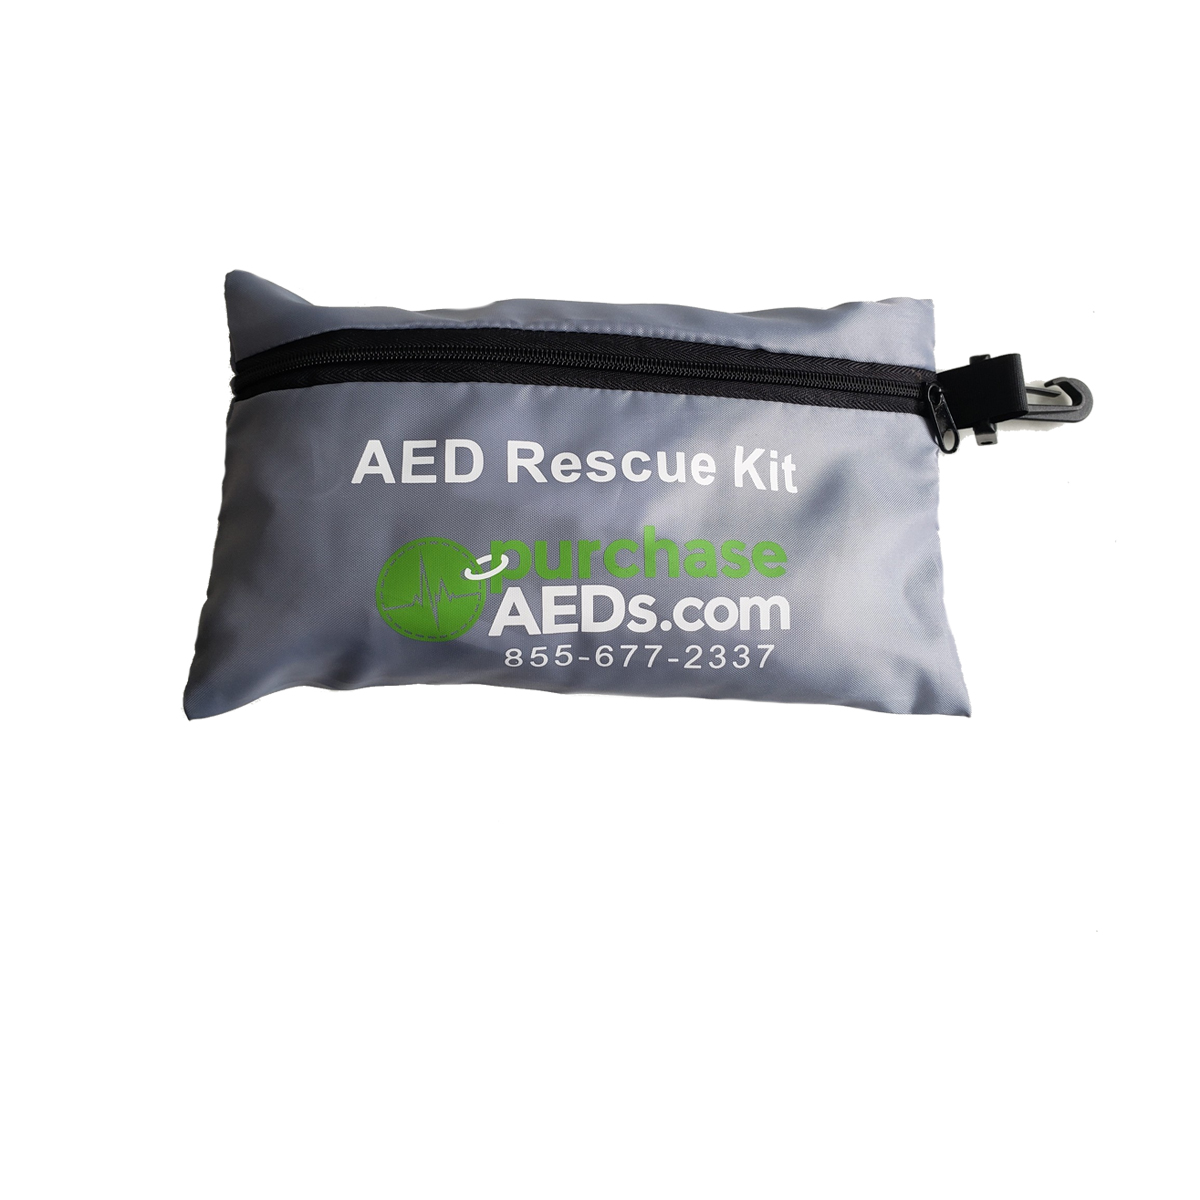 AED Rescue Kit PurchaseAEDs.com 